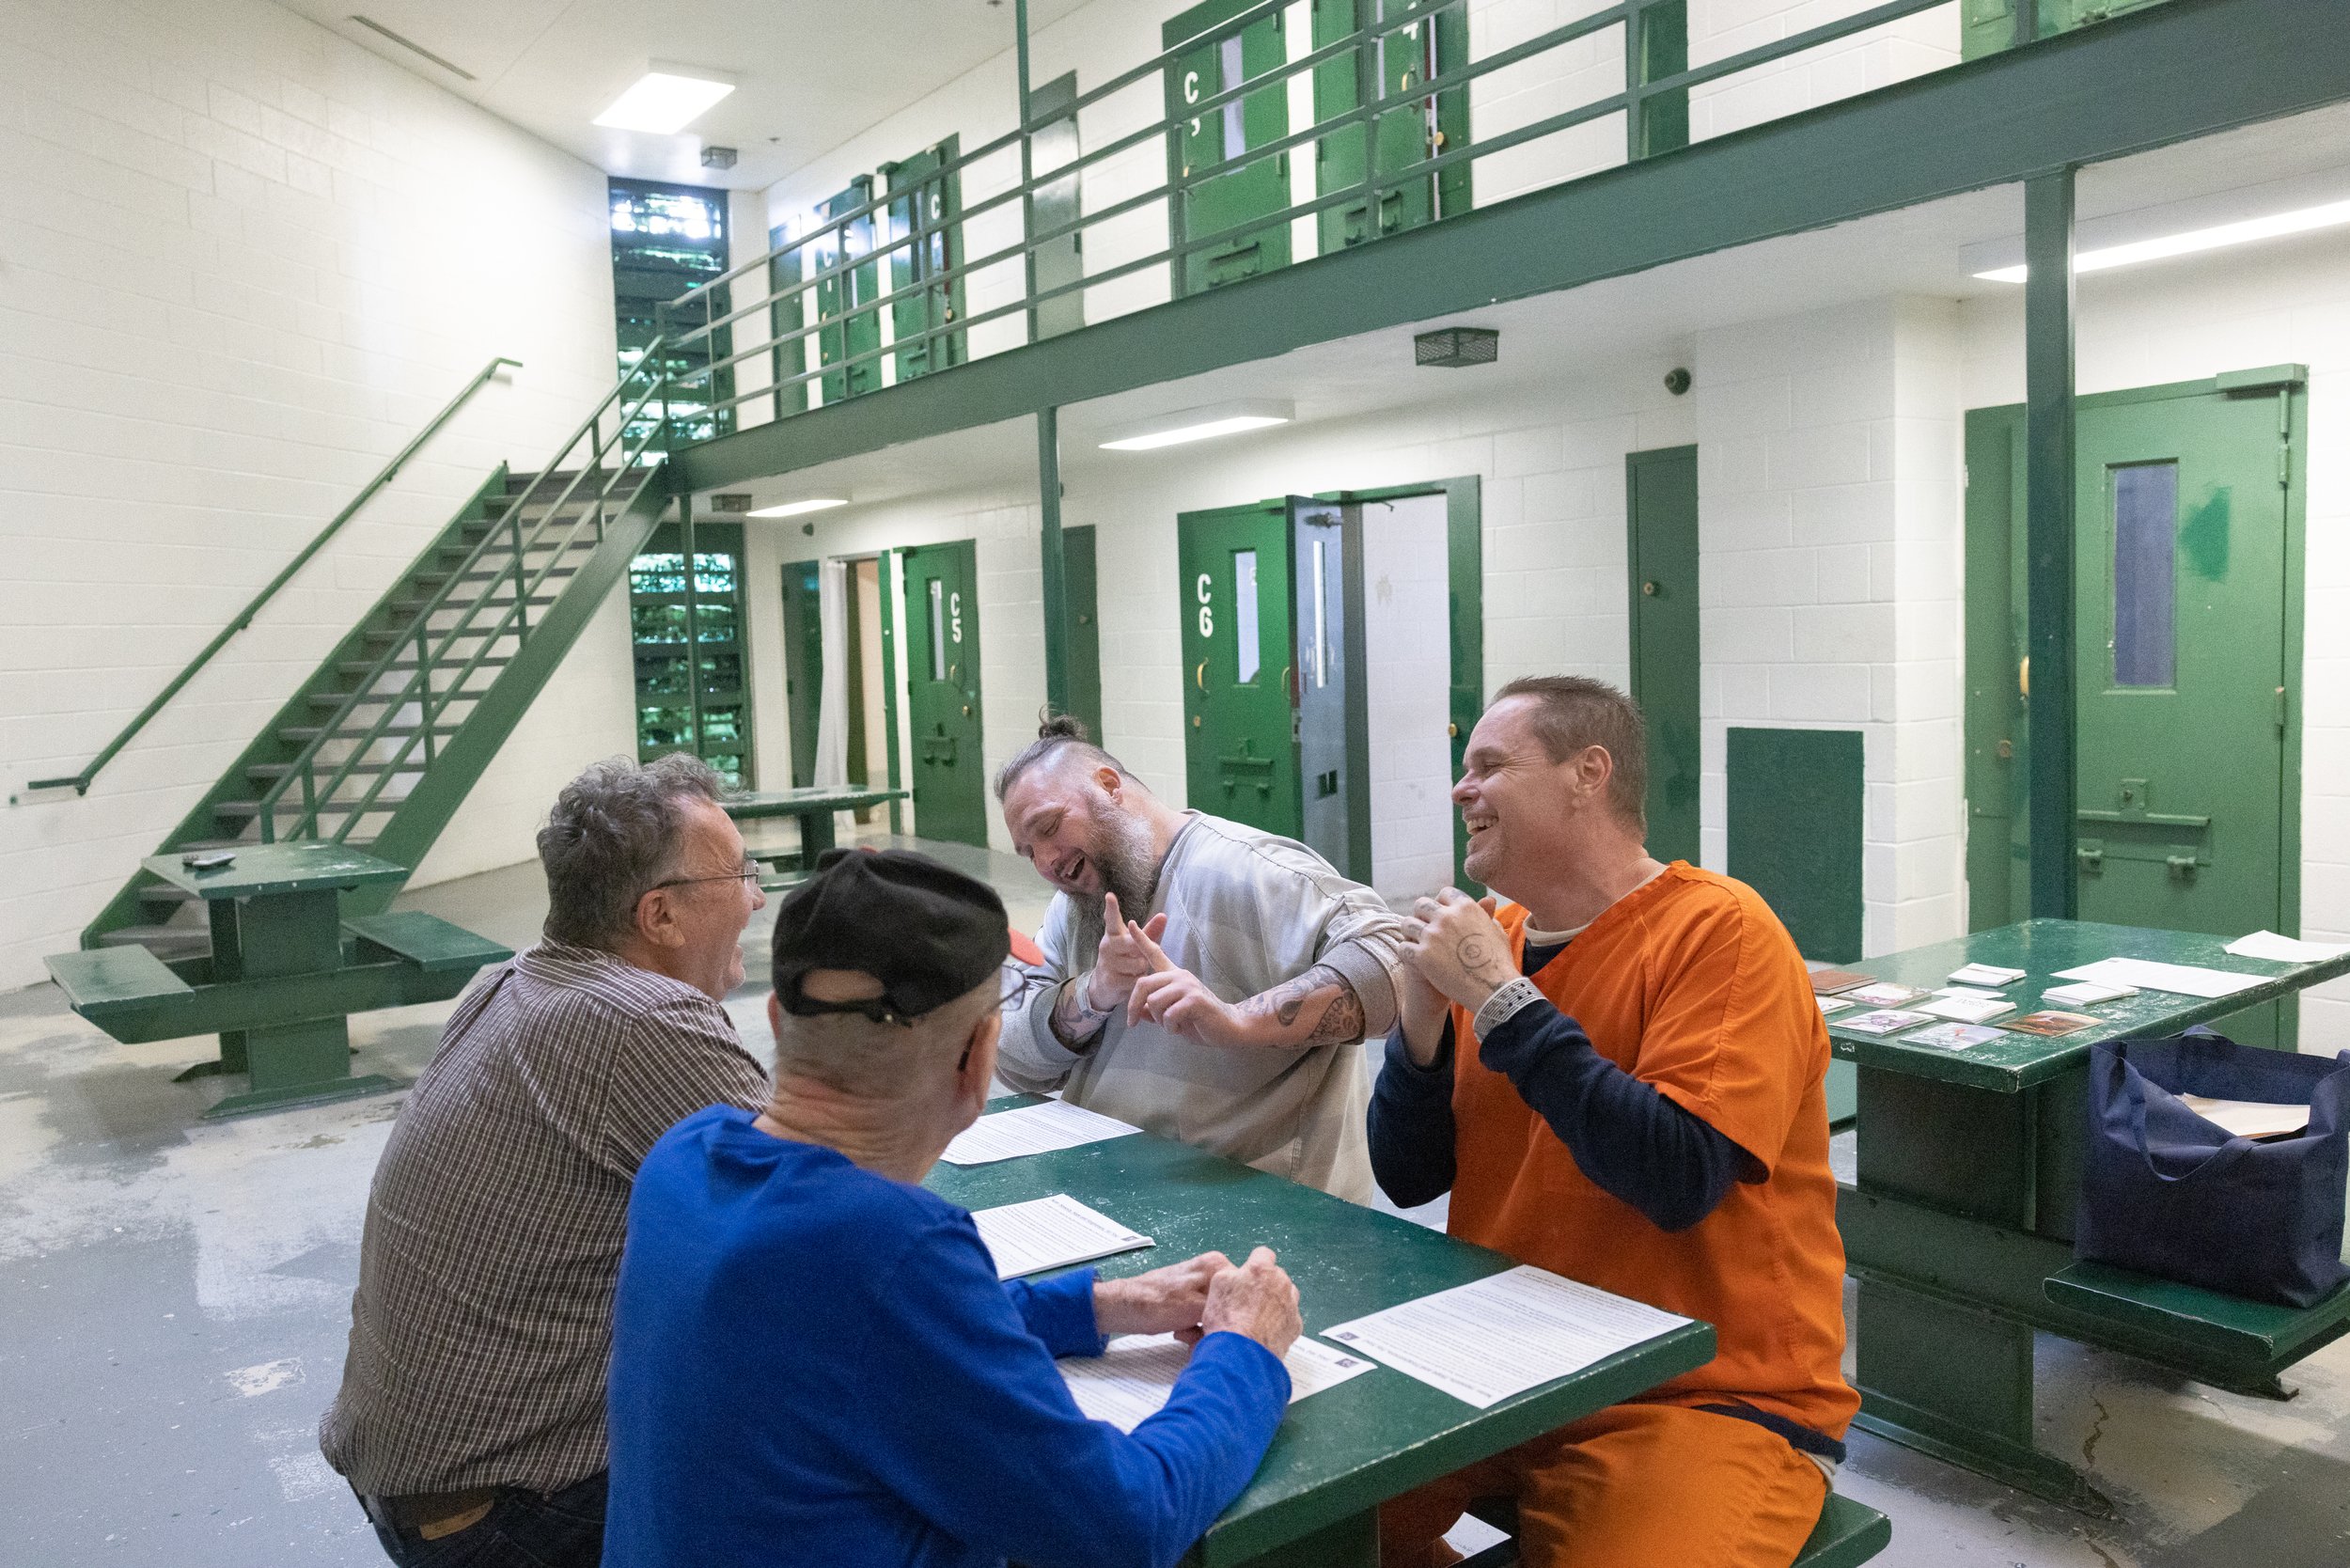  Perry County Jail inmates James Tiller and Charles Blakey took part in a Bible study with Mark Renaud and John Gahan on Feb. 27 at the Perry County Jail in Perryville, Missouri. Renaud and Gahan are part of a group of volunteers with the Society of 